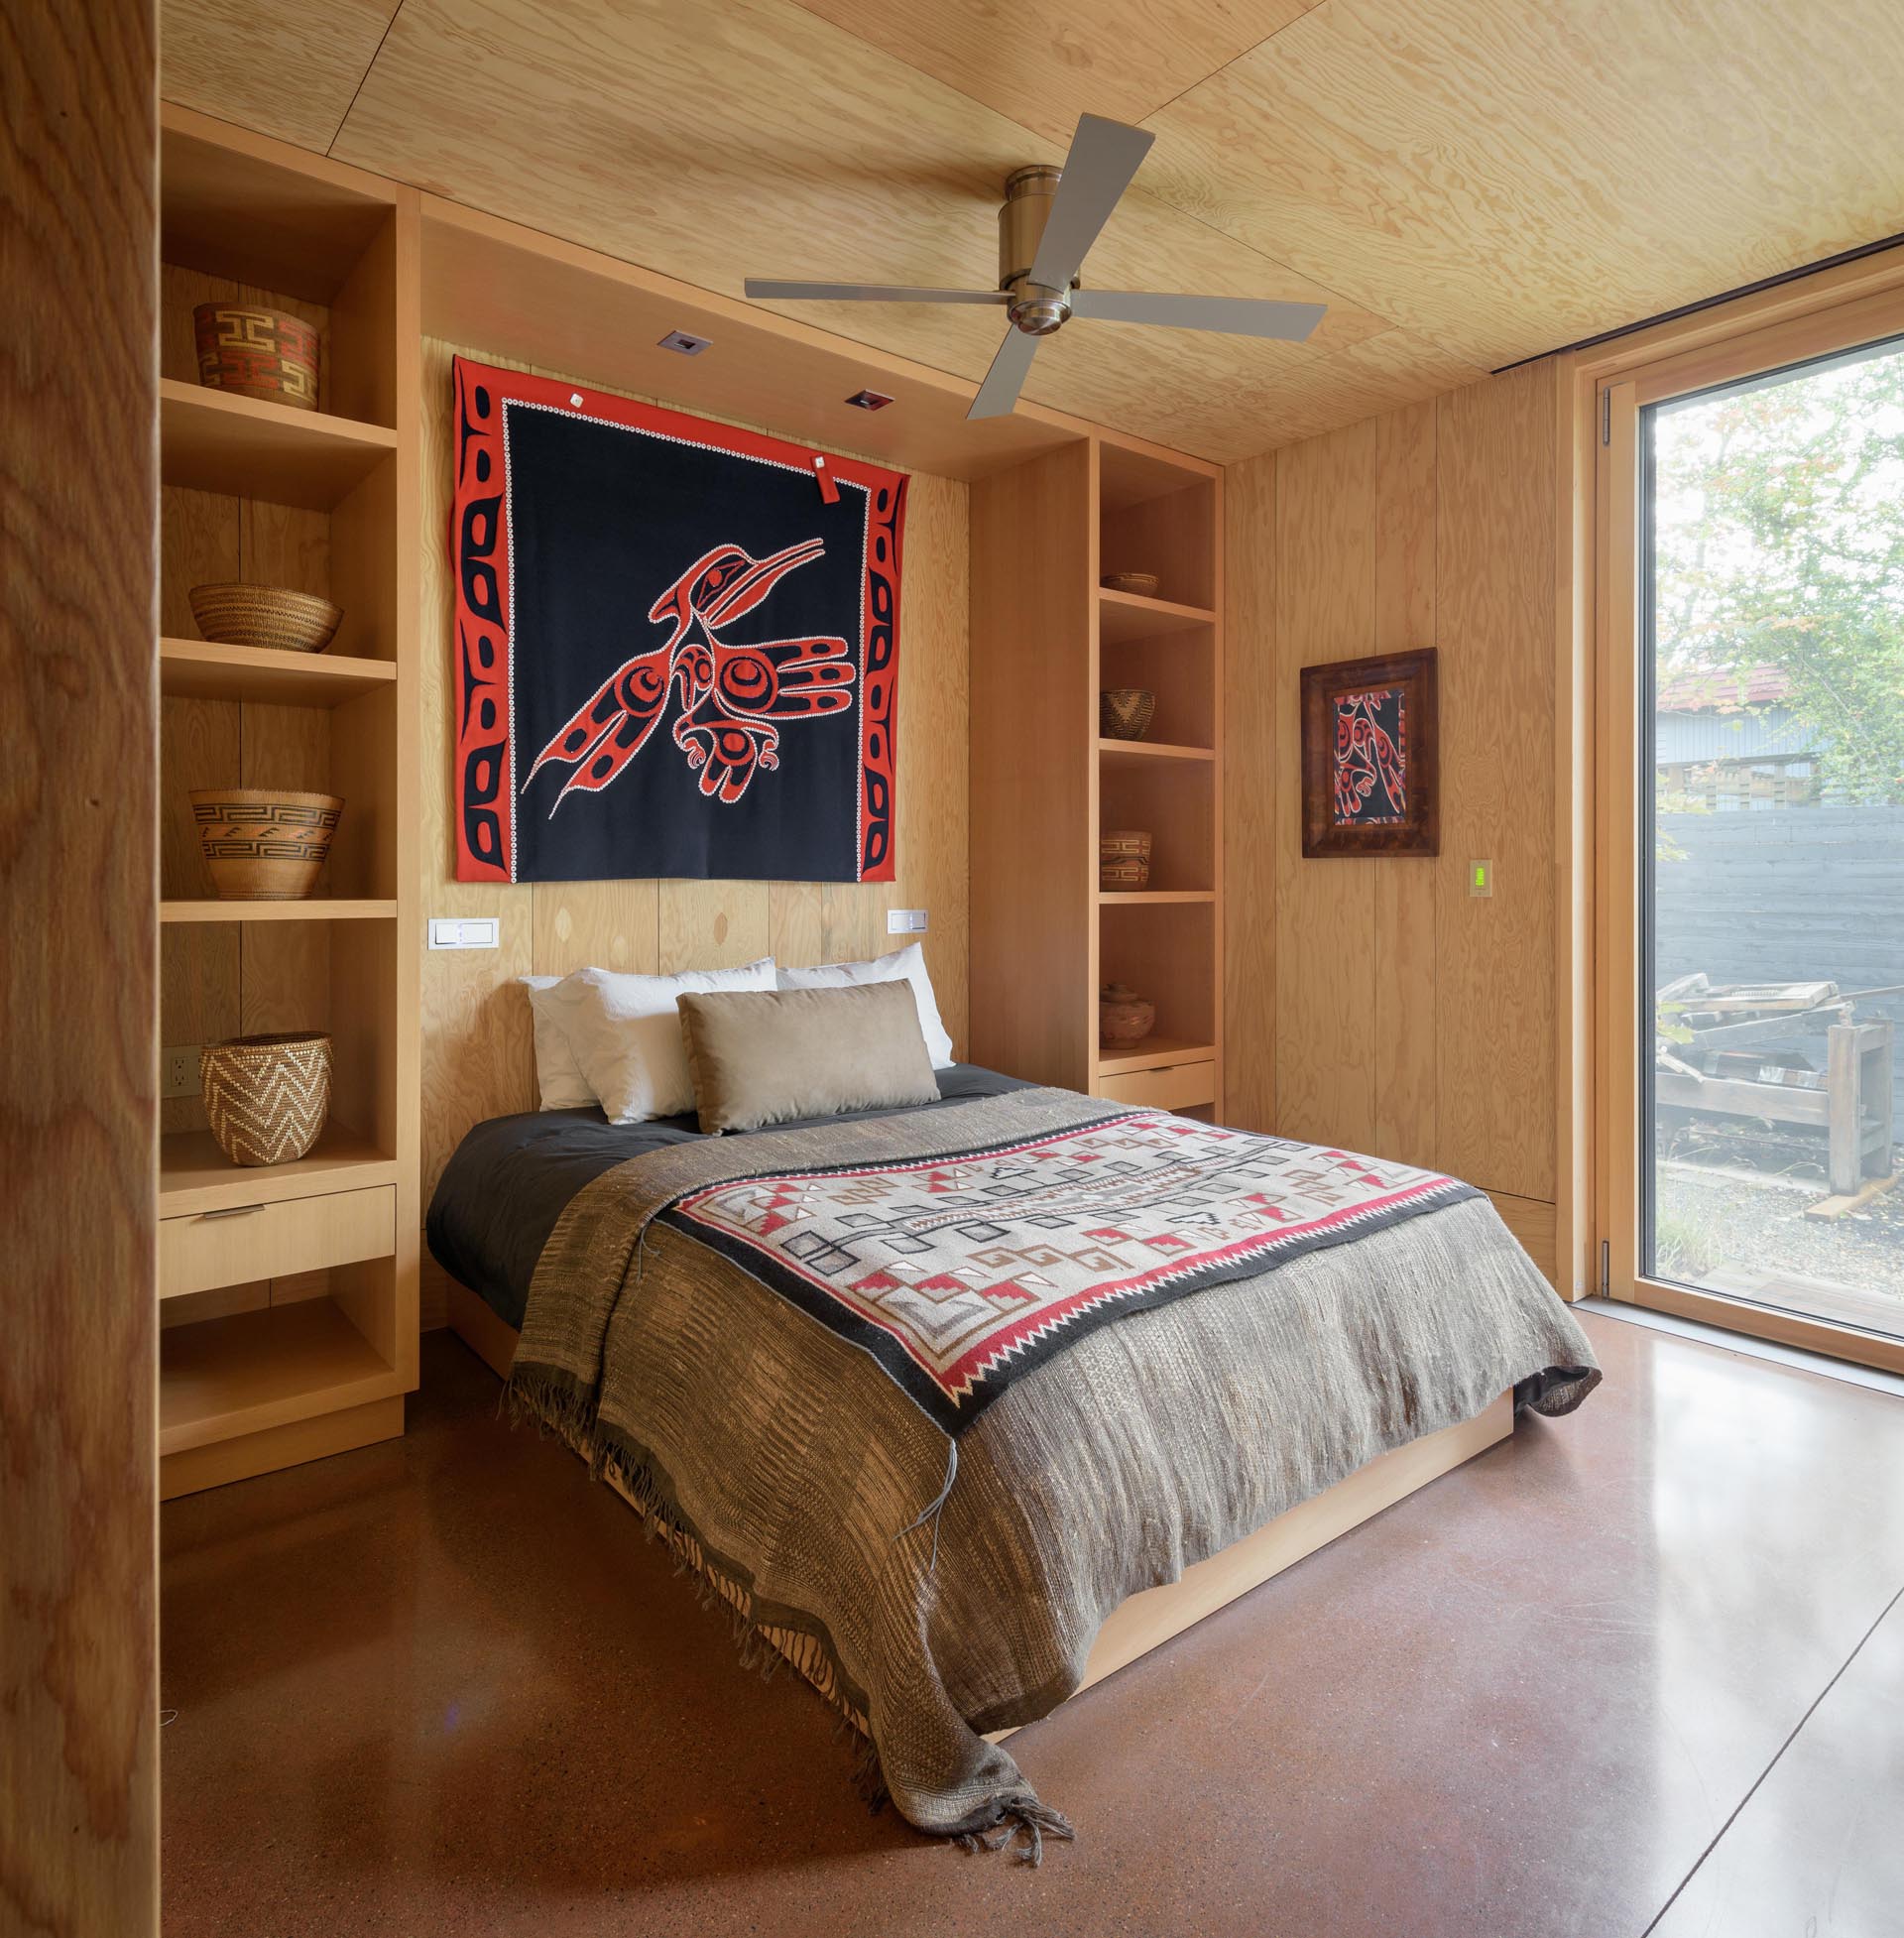 A contemporary cabin bedroom with concrete floors and built-in shelving.